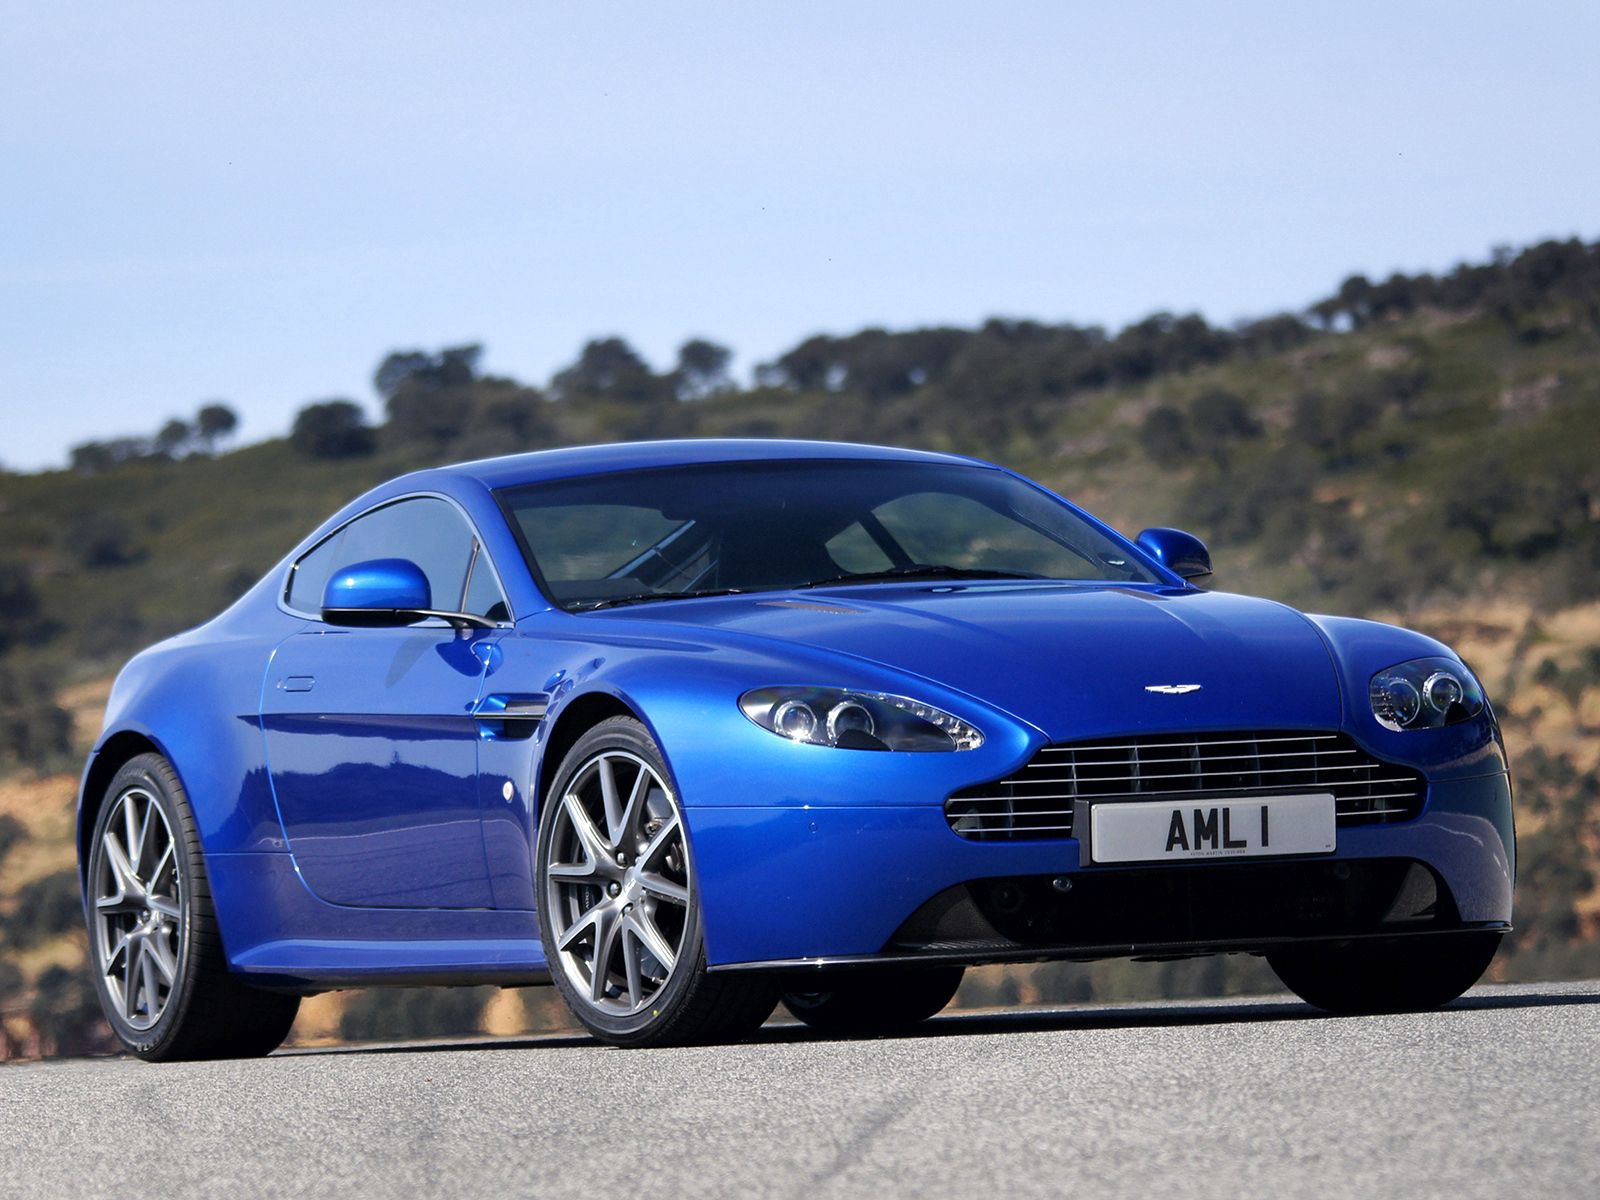 v8, front view, cars, nature, aston martin, blue, style, 2011, vantage lock screen backgrounds